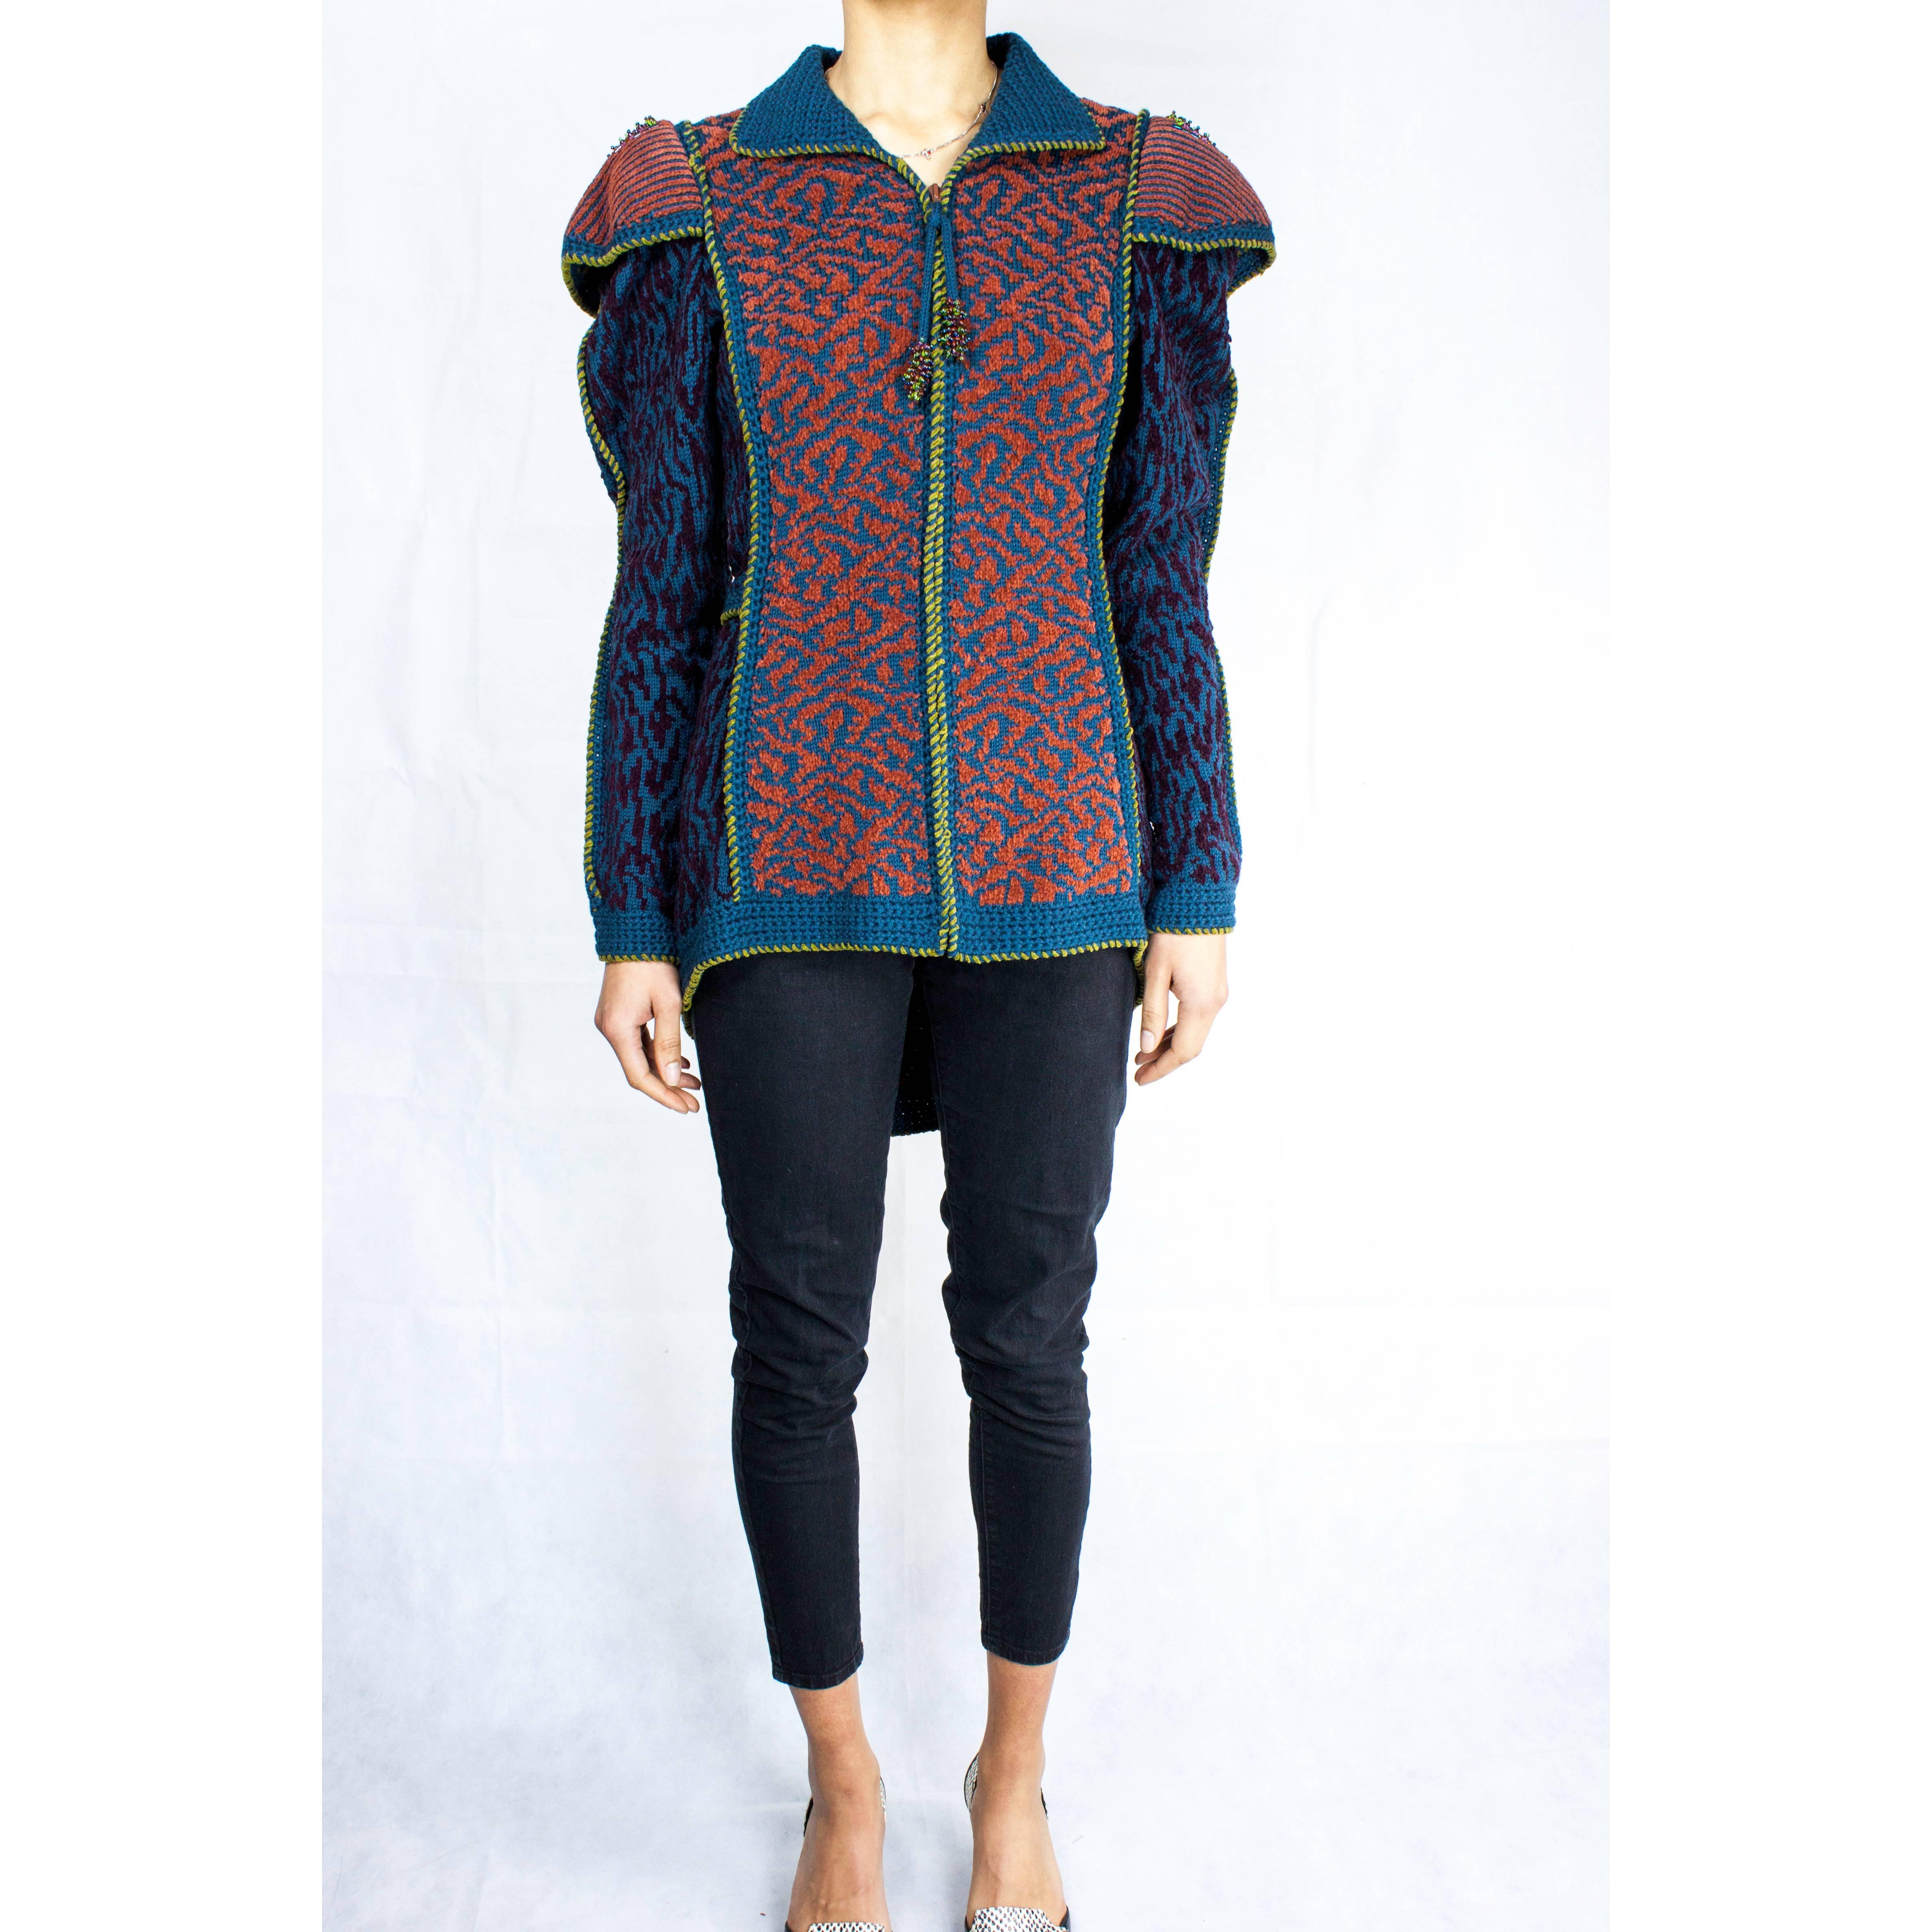 Classic and exuberant style is the way to describe this beautiful jacket.

Anne Fewlass creates unique, elaborate, and richly coloured knitwear inspired by historical designs.

In this design Anne Fewlass uses intricate decorative panels constructed